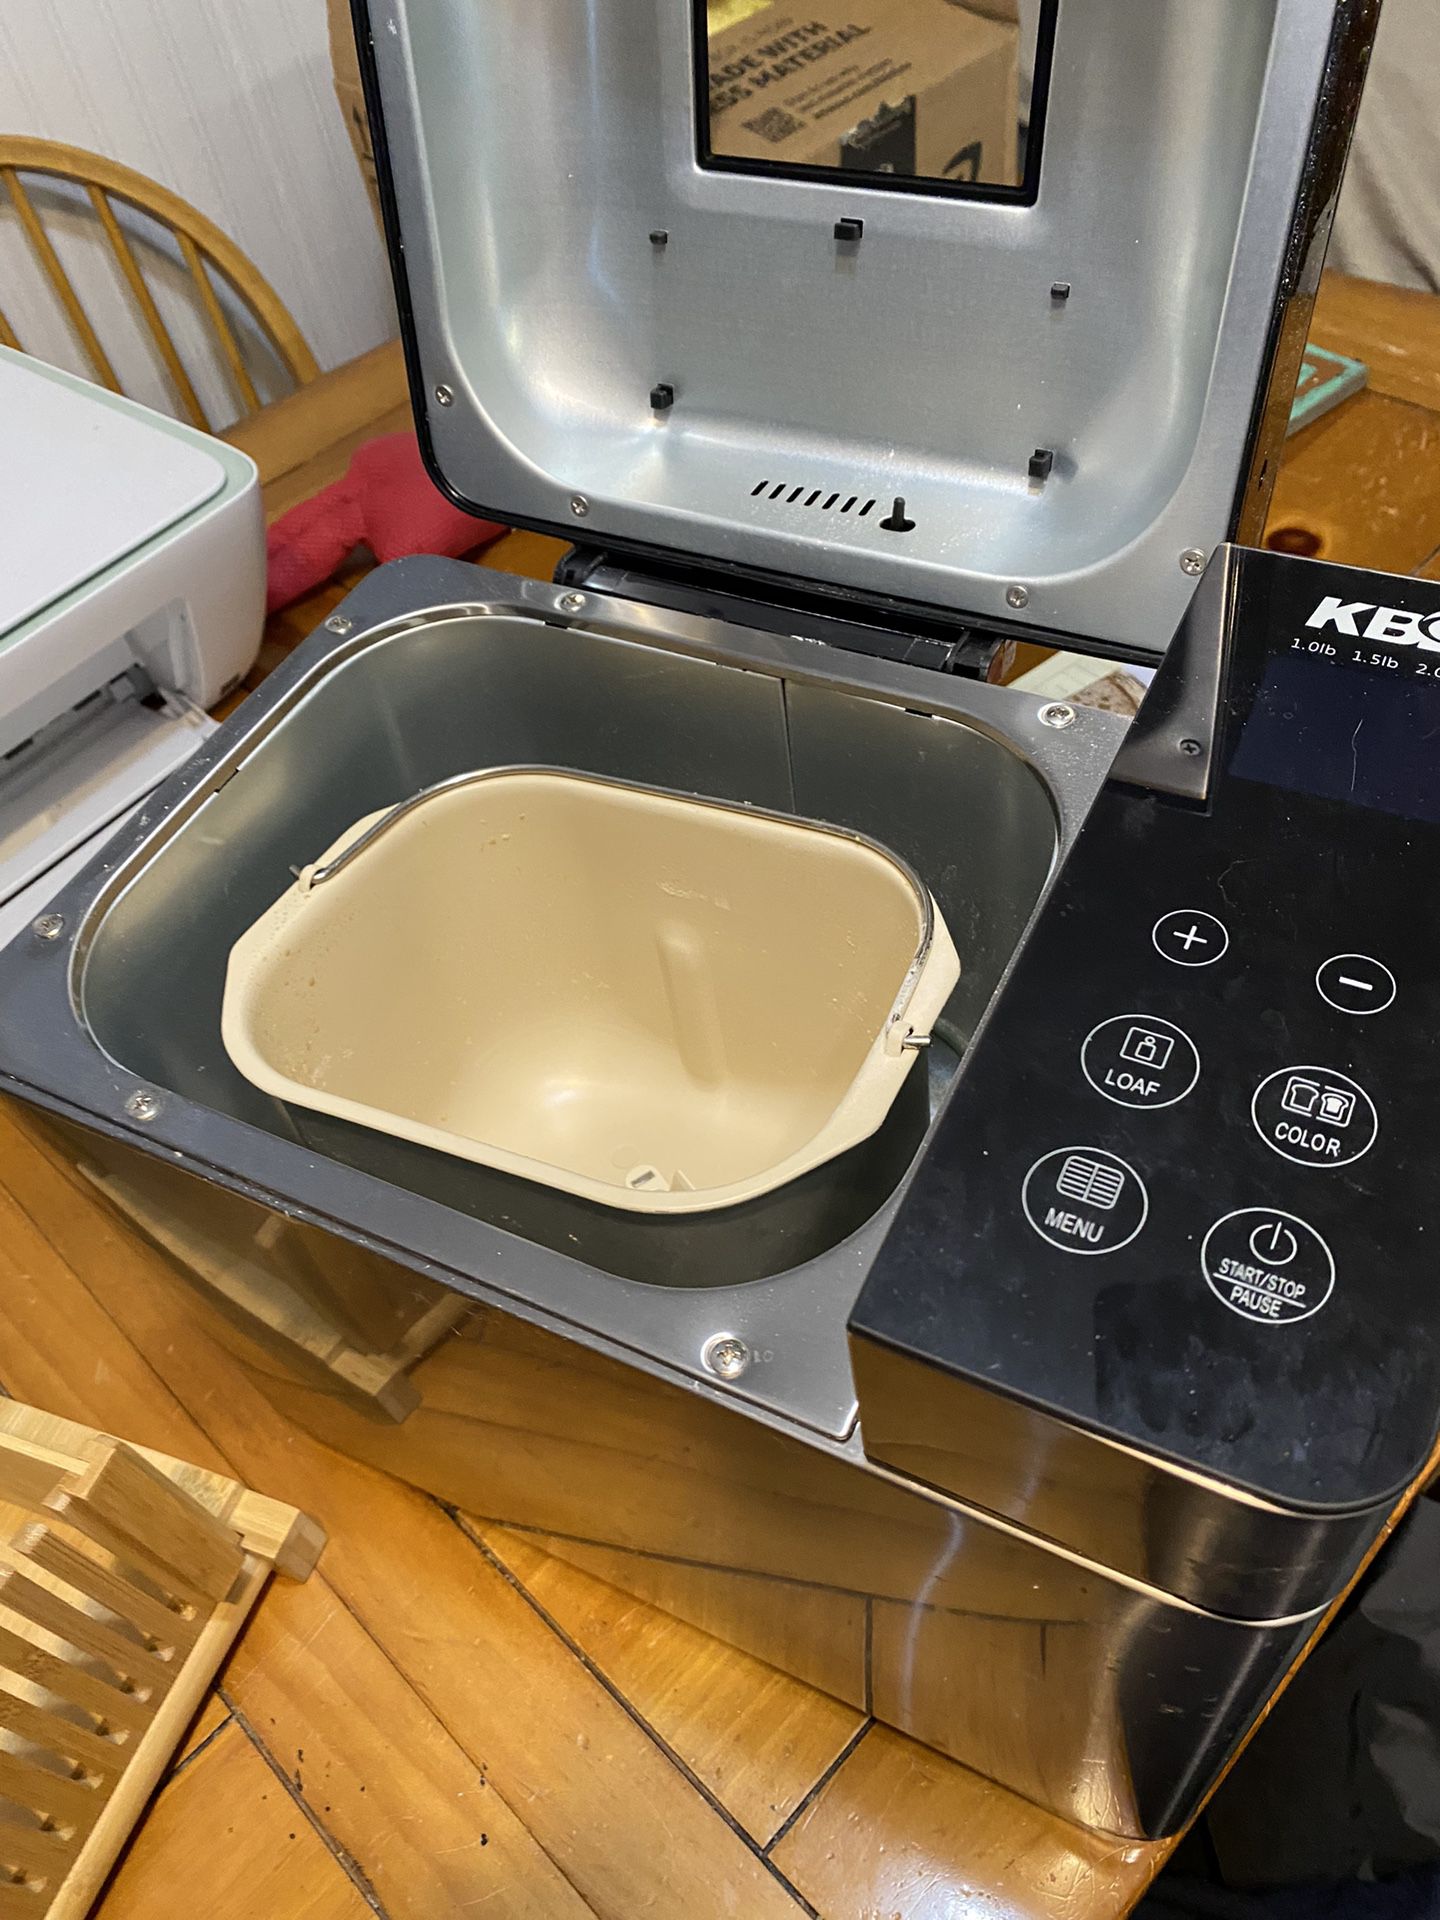 Kbs Bread Maker New Used 2times